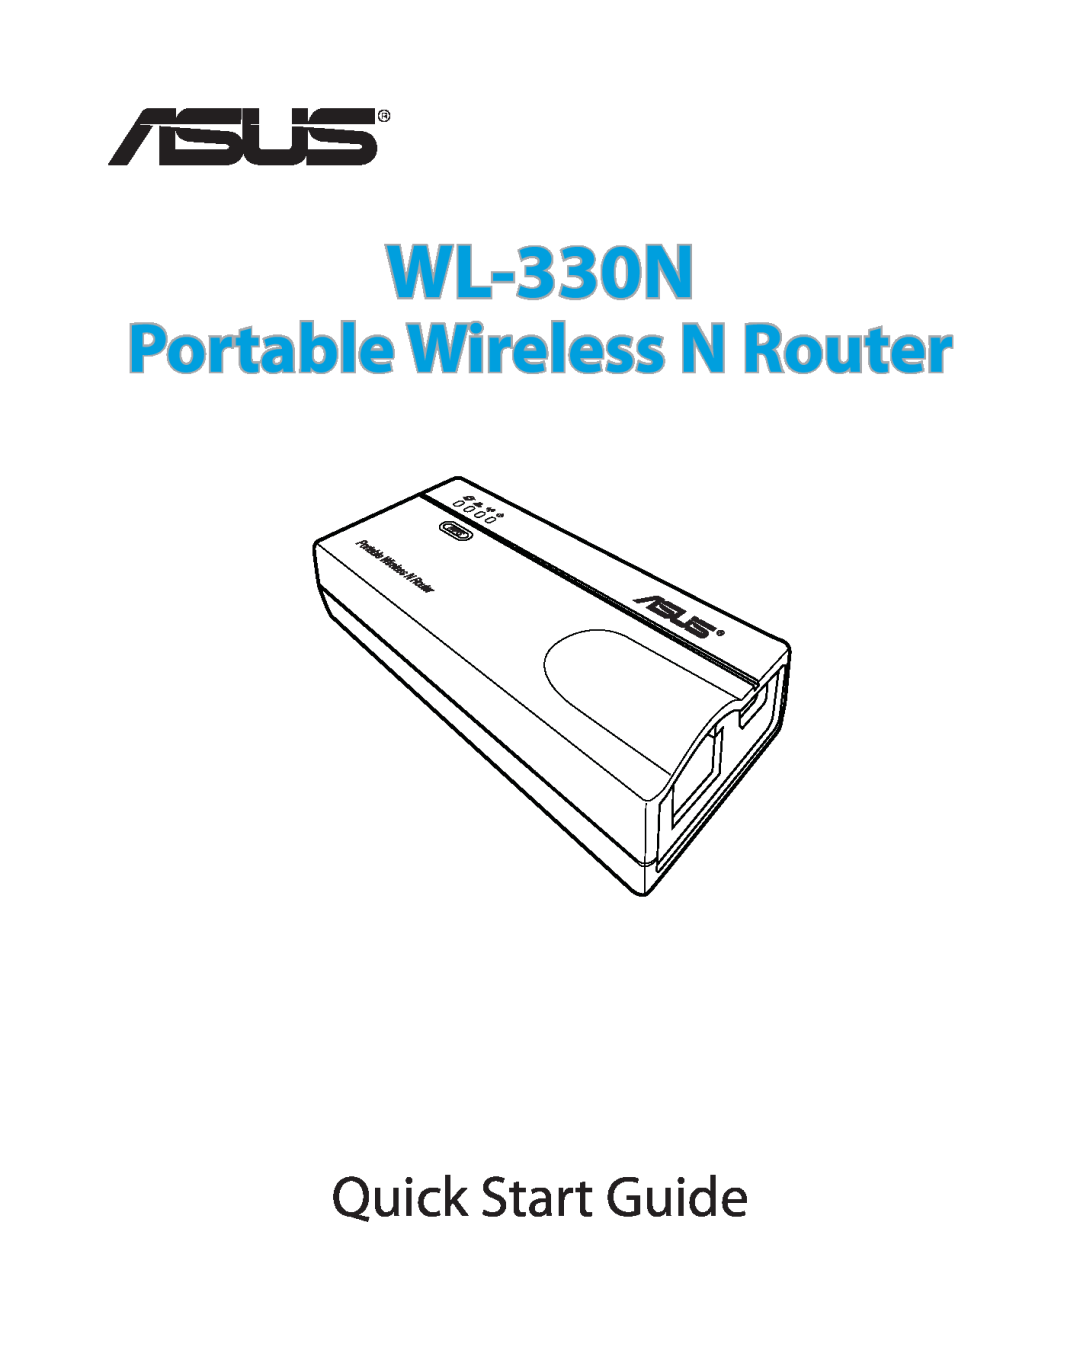 Asus WL330N quick start WL-330N, Portable Wireless N Router, Quick Start Guide 